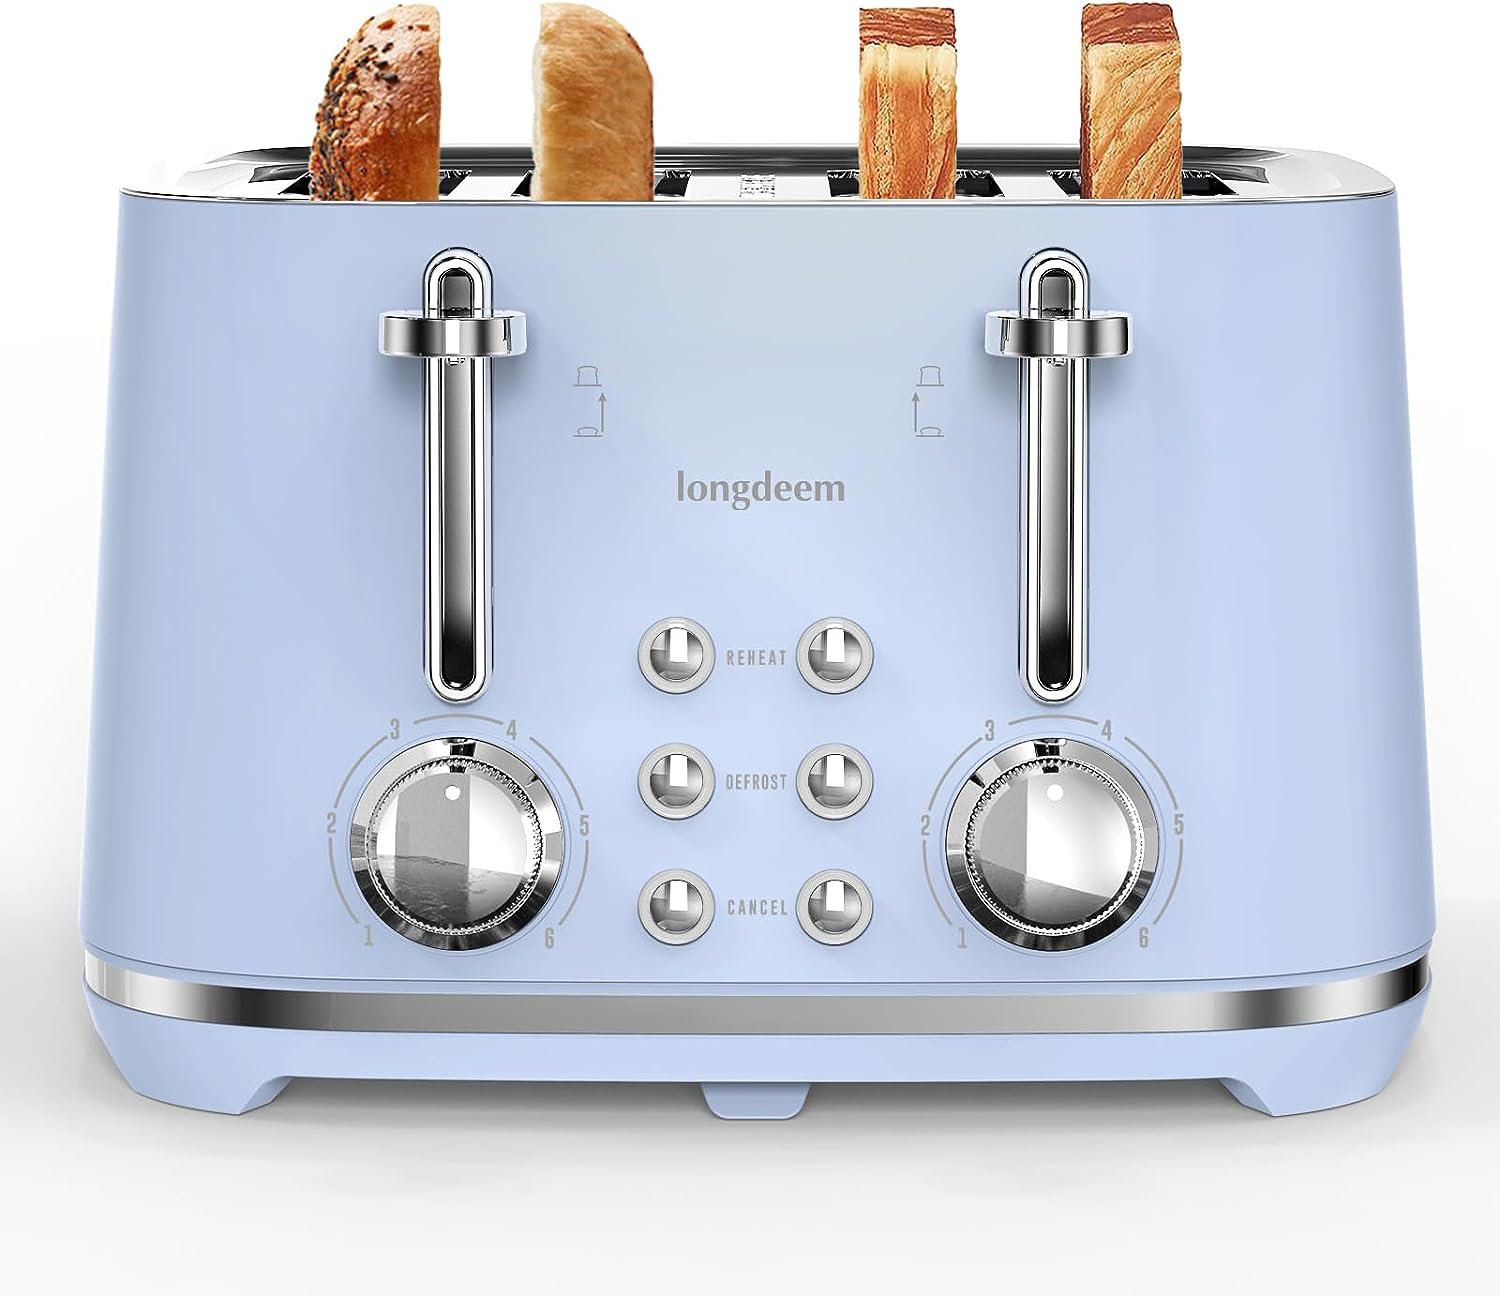 Long Slot Toaster 2 Slice Best Toaster 2 Slice Wide Slot, Vintage Black  Toaster with Defrost/Reheat/Cancel/6 Bread Shade Settings/Removable Crumb  Tray